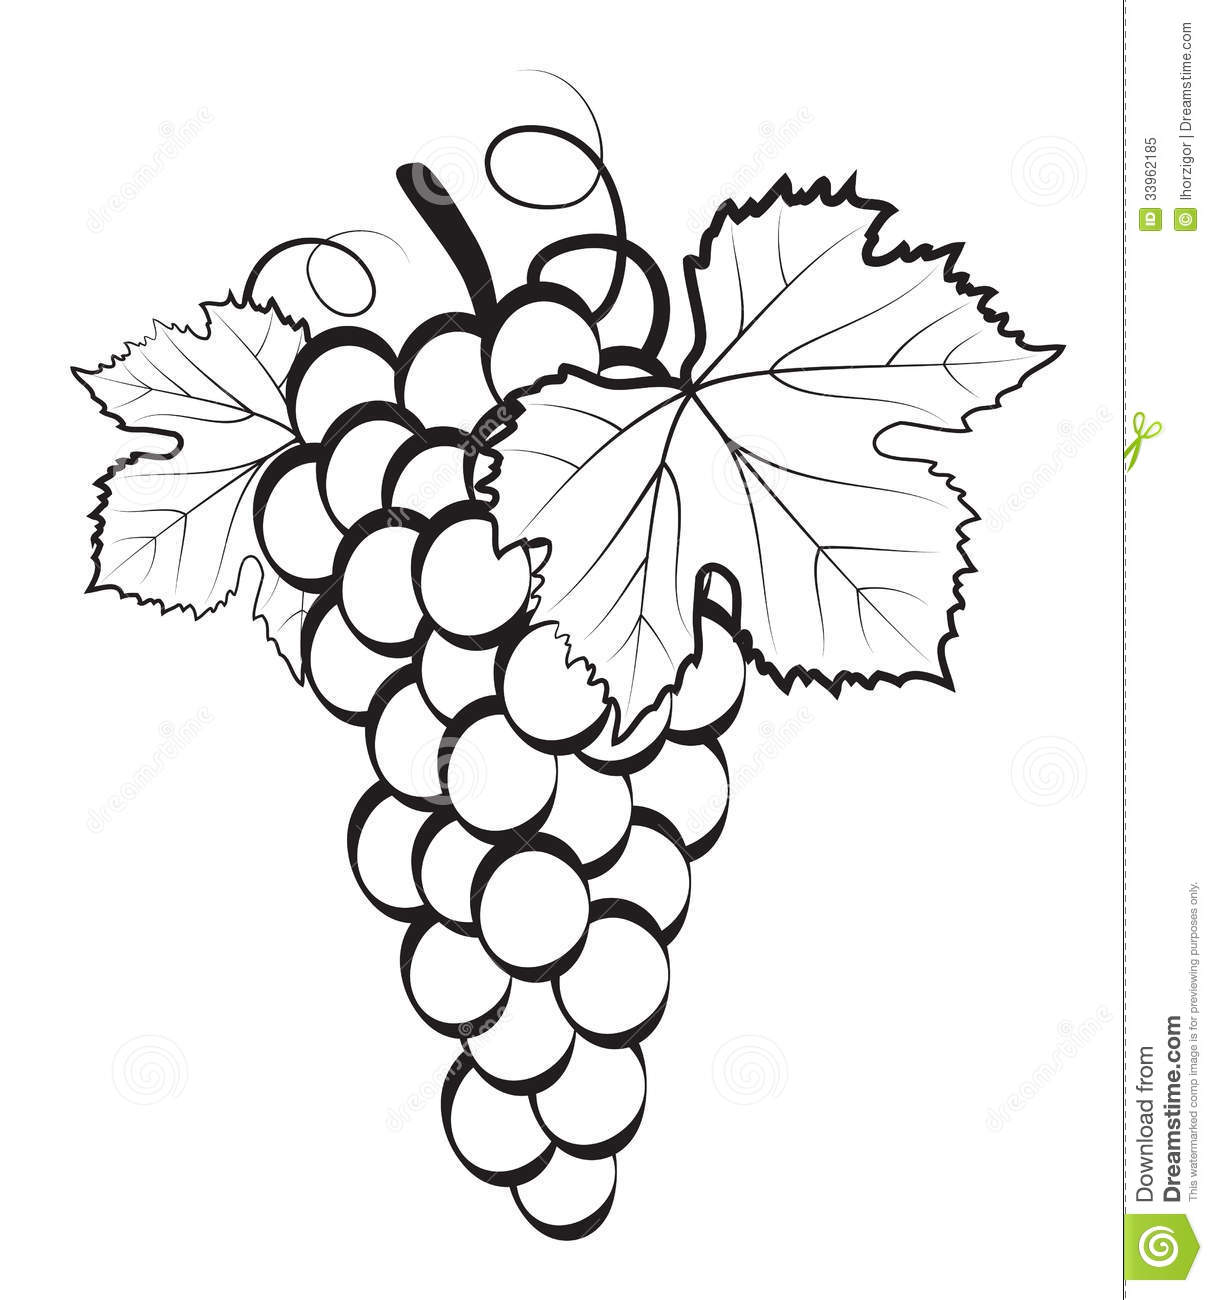 Bunch Of Grapes Clipart Bunch Of Grapes Royalty Free Stock Photo    